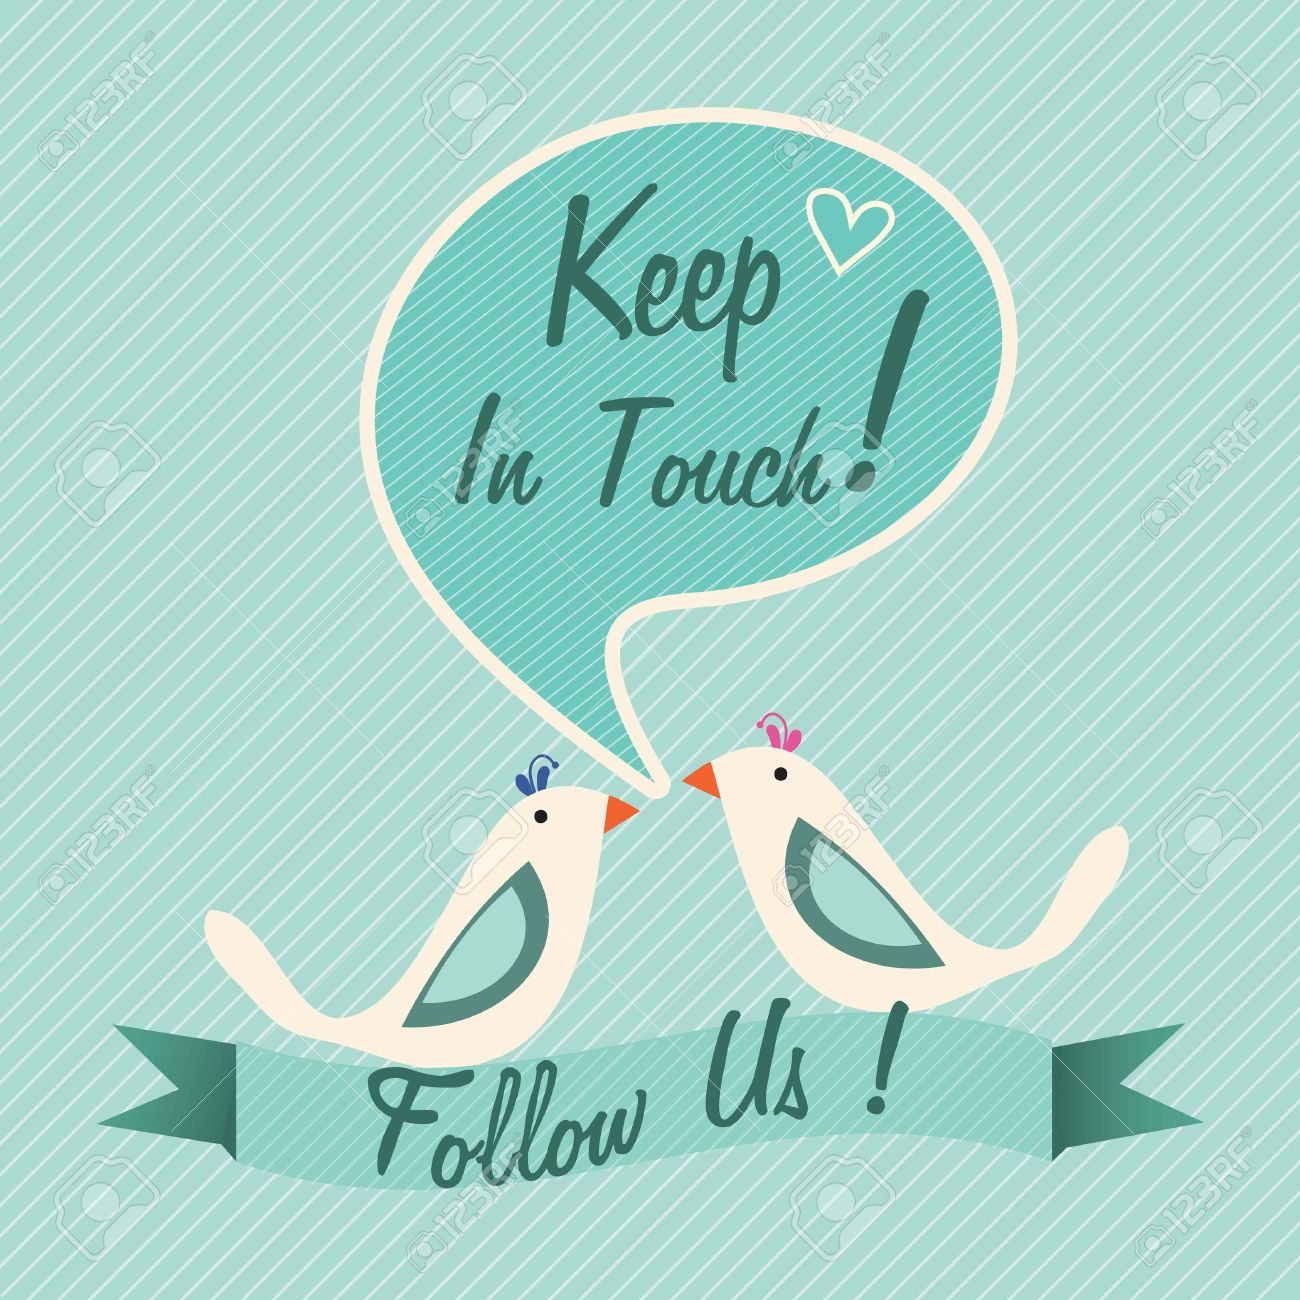 Keep In Touch Follow Us Love Birds